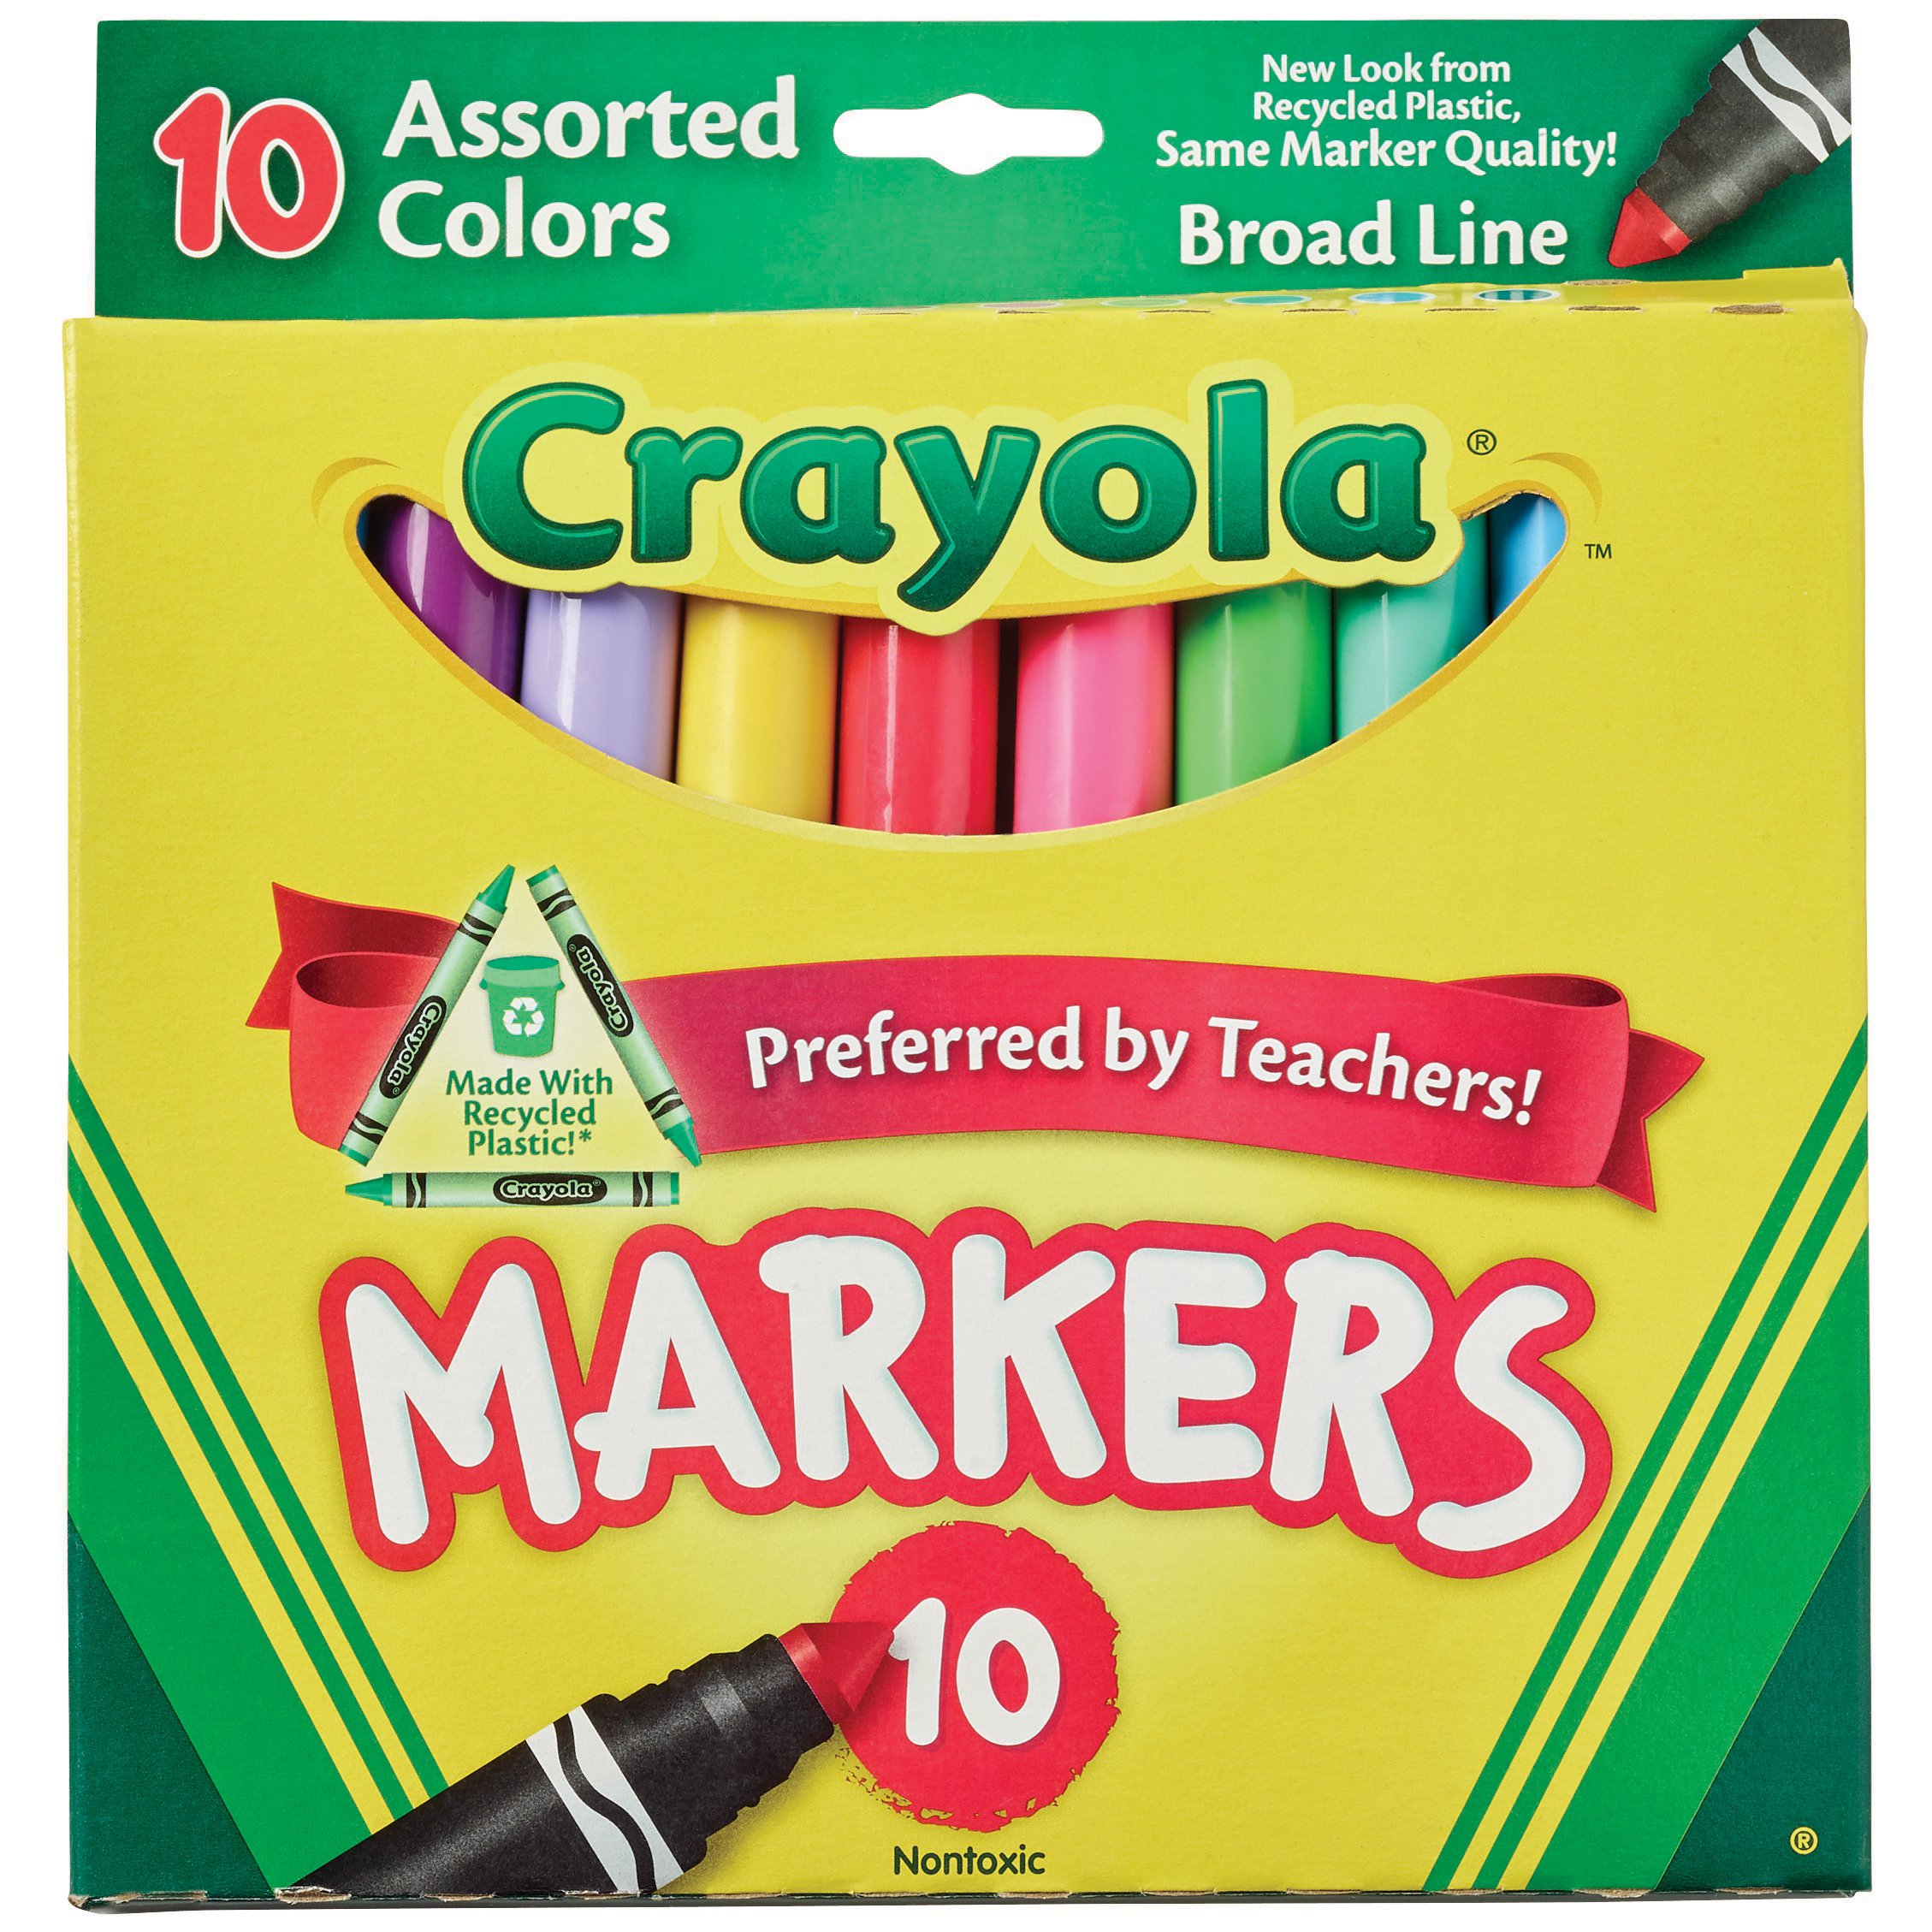 Crayola Broad Line Assorted Color Markers - Shop Markers at H-E-B